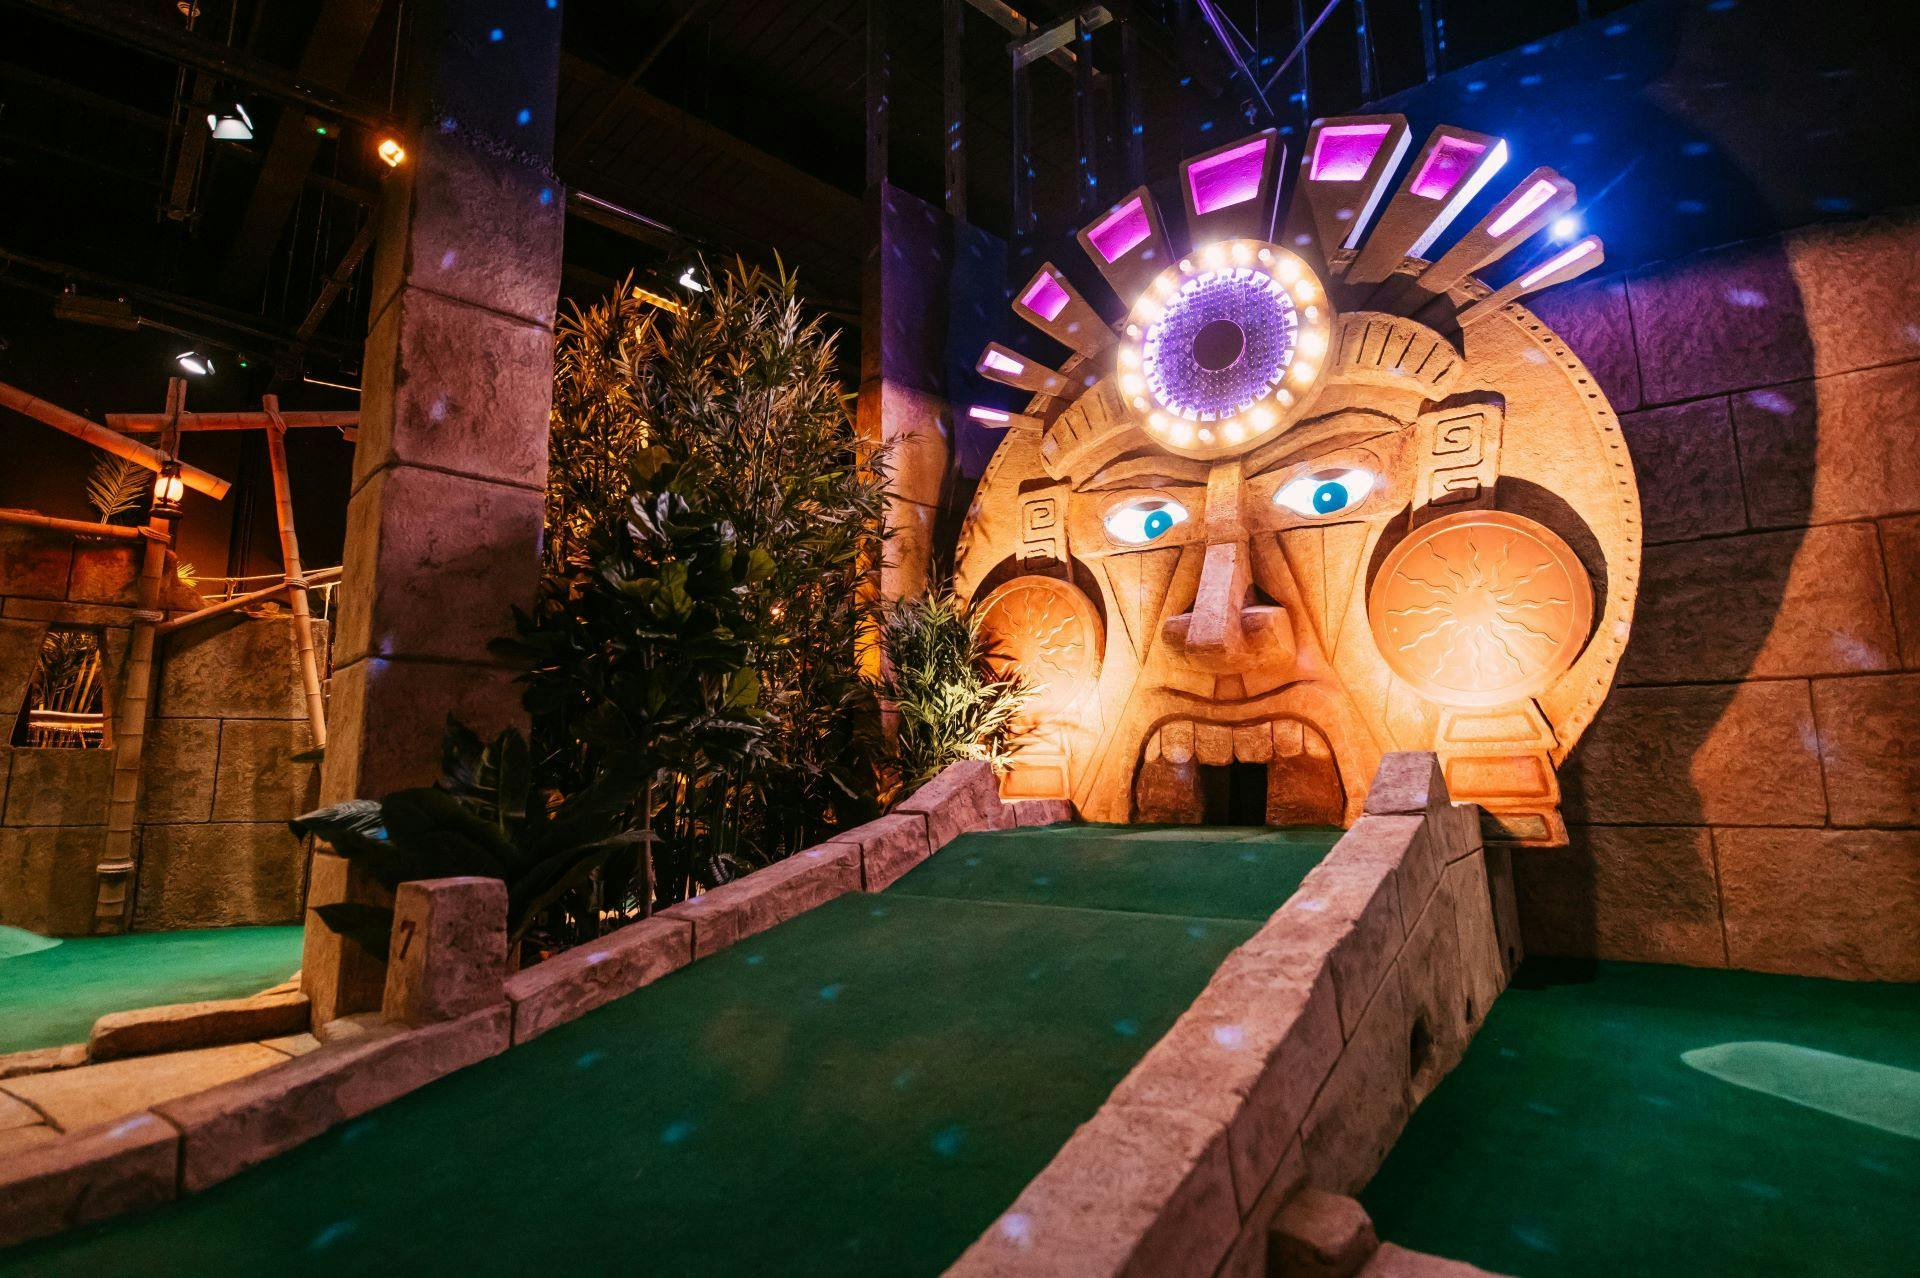 Mini golf green run-up to the Fabulous Sacred Mask’s large gold structure, with big glowing eyes and a pink jewel-encrusted crown. 